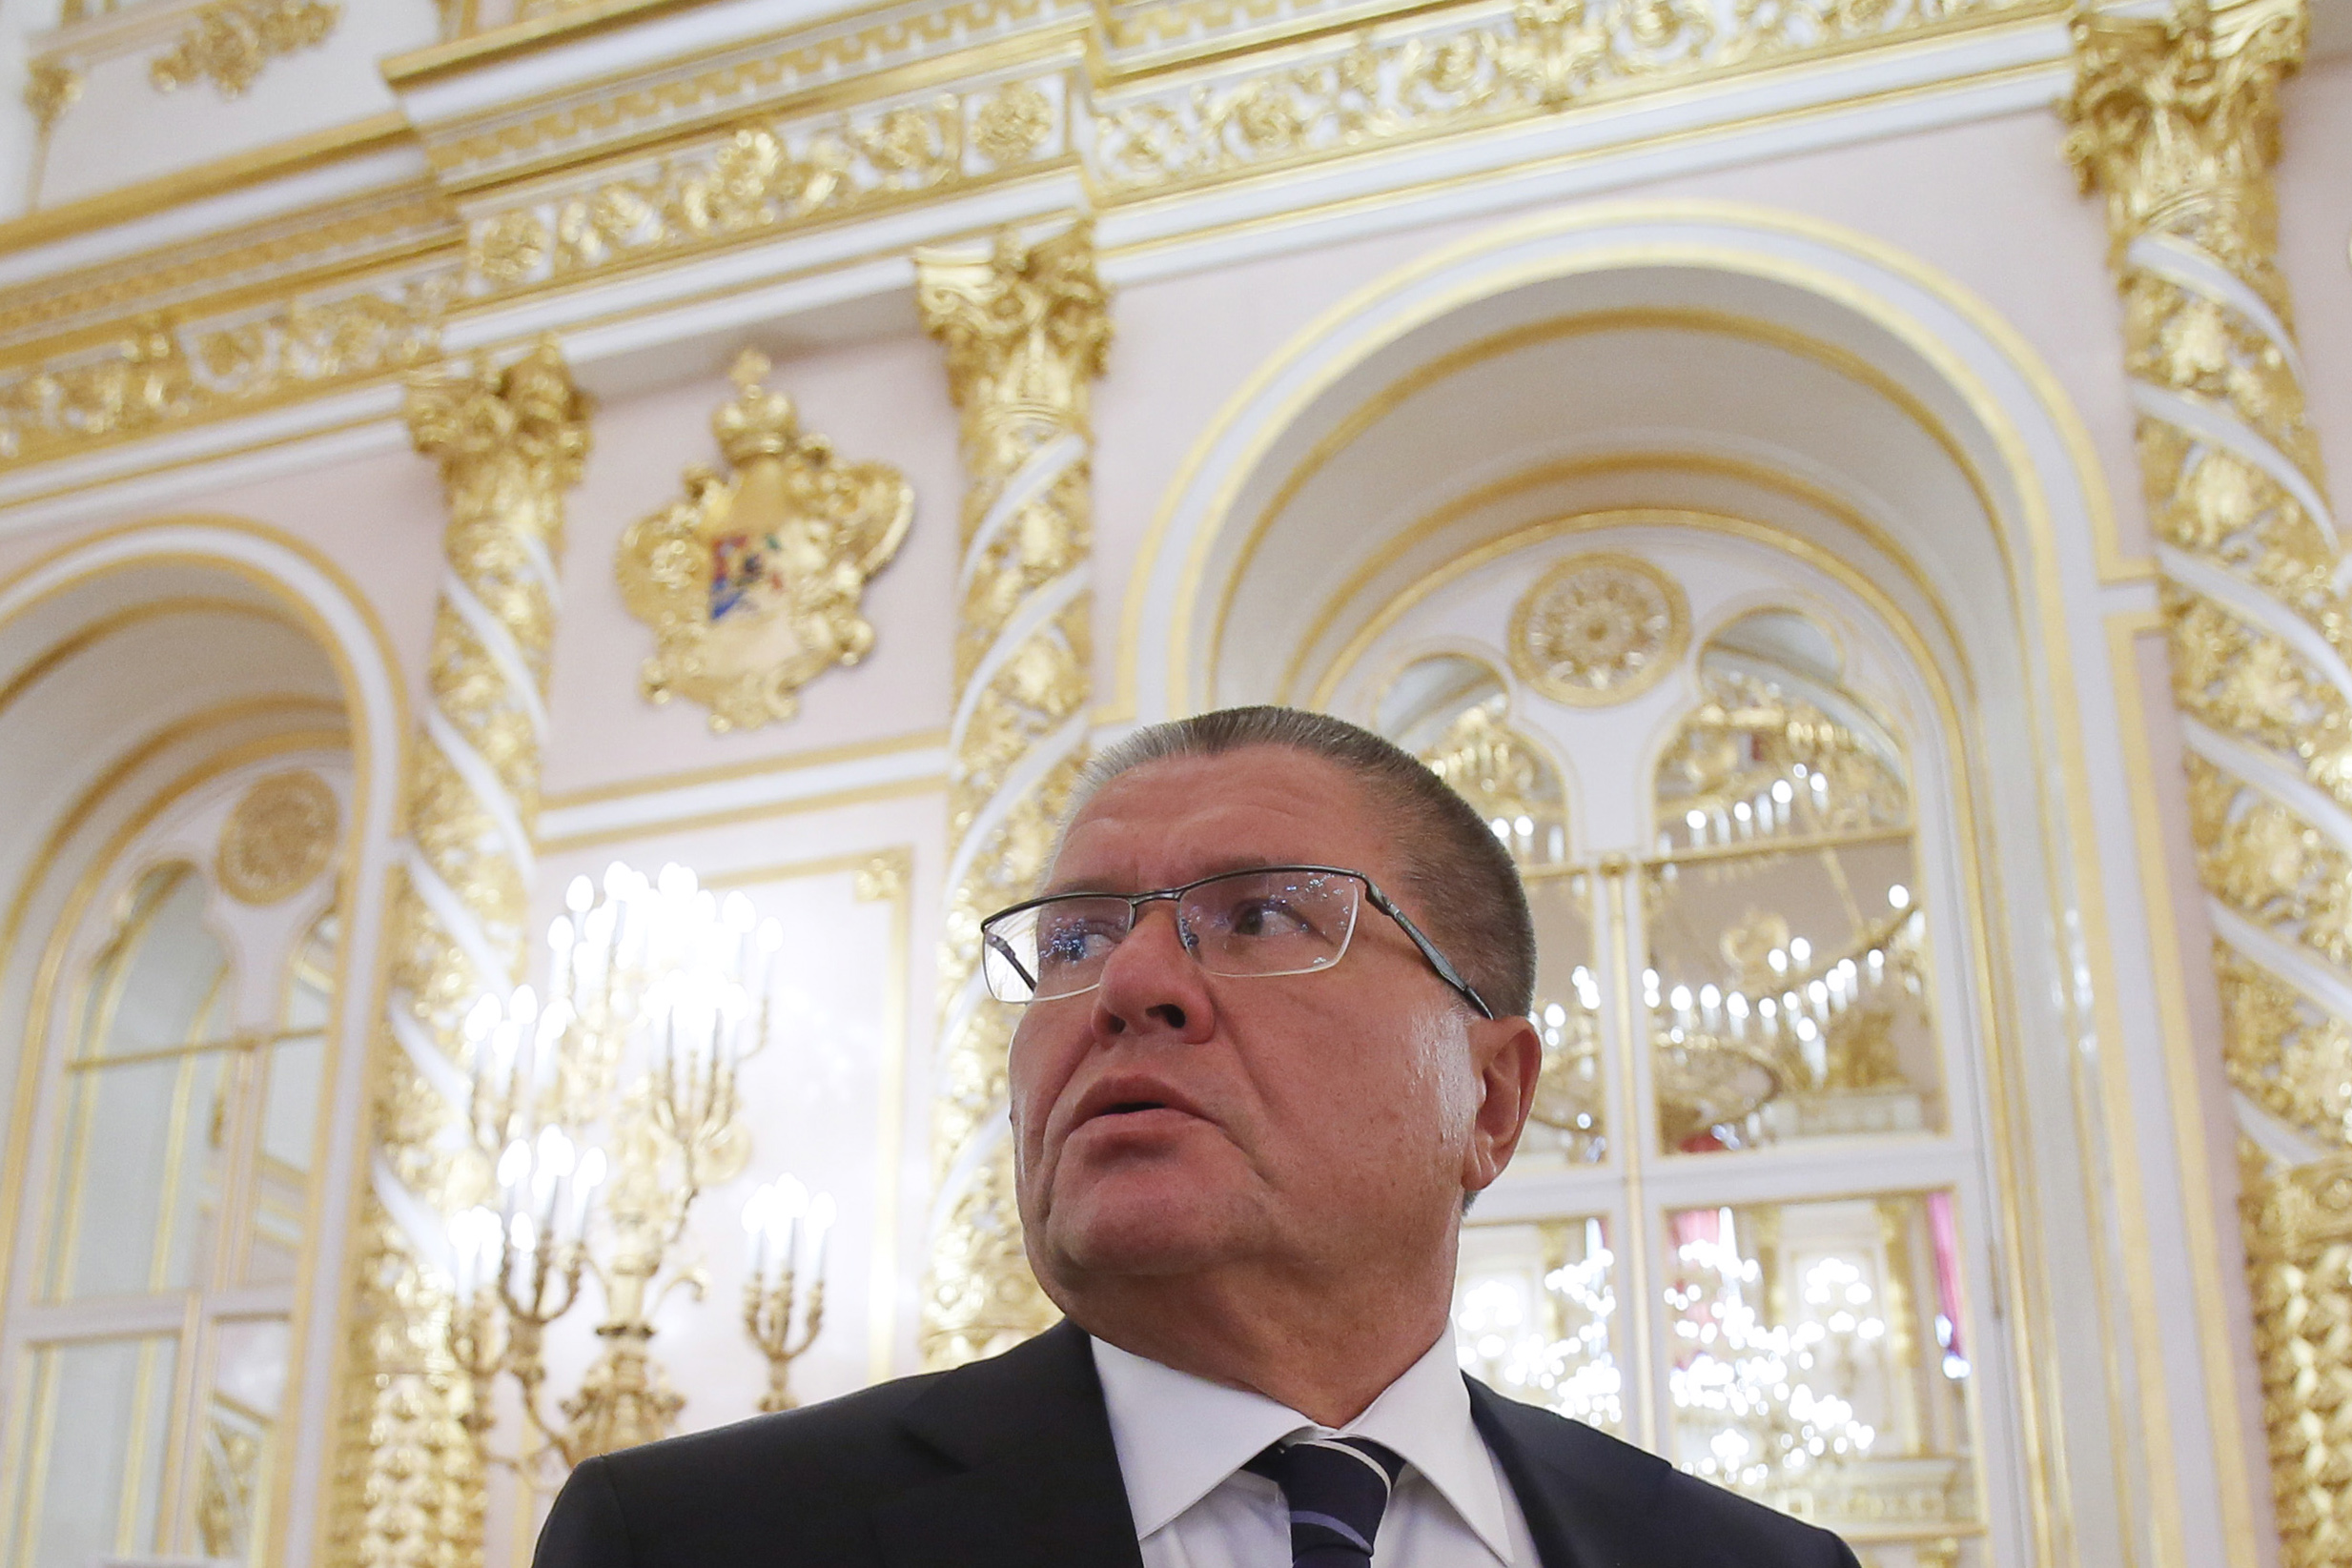 (FILES) This file photo taken on September 18, 2014 shows Russian Economy Minister Alexei Ulyukayev looking on before a meeting of the State Council at the Kremlin in Moscow. Russia's Investigative Committee said Tuesday that it had detained Economy Minister Alexei Ulyukayev on suspicion of taking a two-million-dollar bribe over a massive deal involving state-controlled oil giant Rosneft. / AFP PHOTO / POOL / MAXIM SHEMETOV